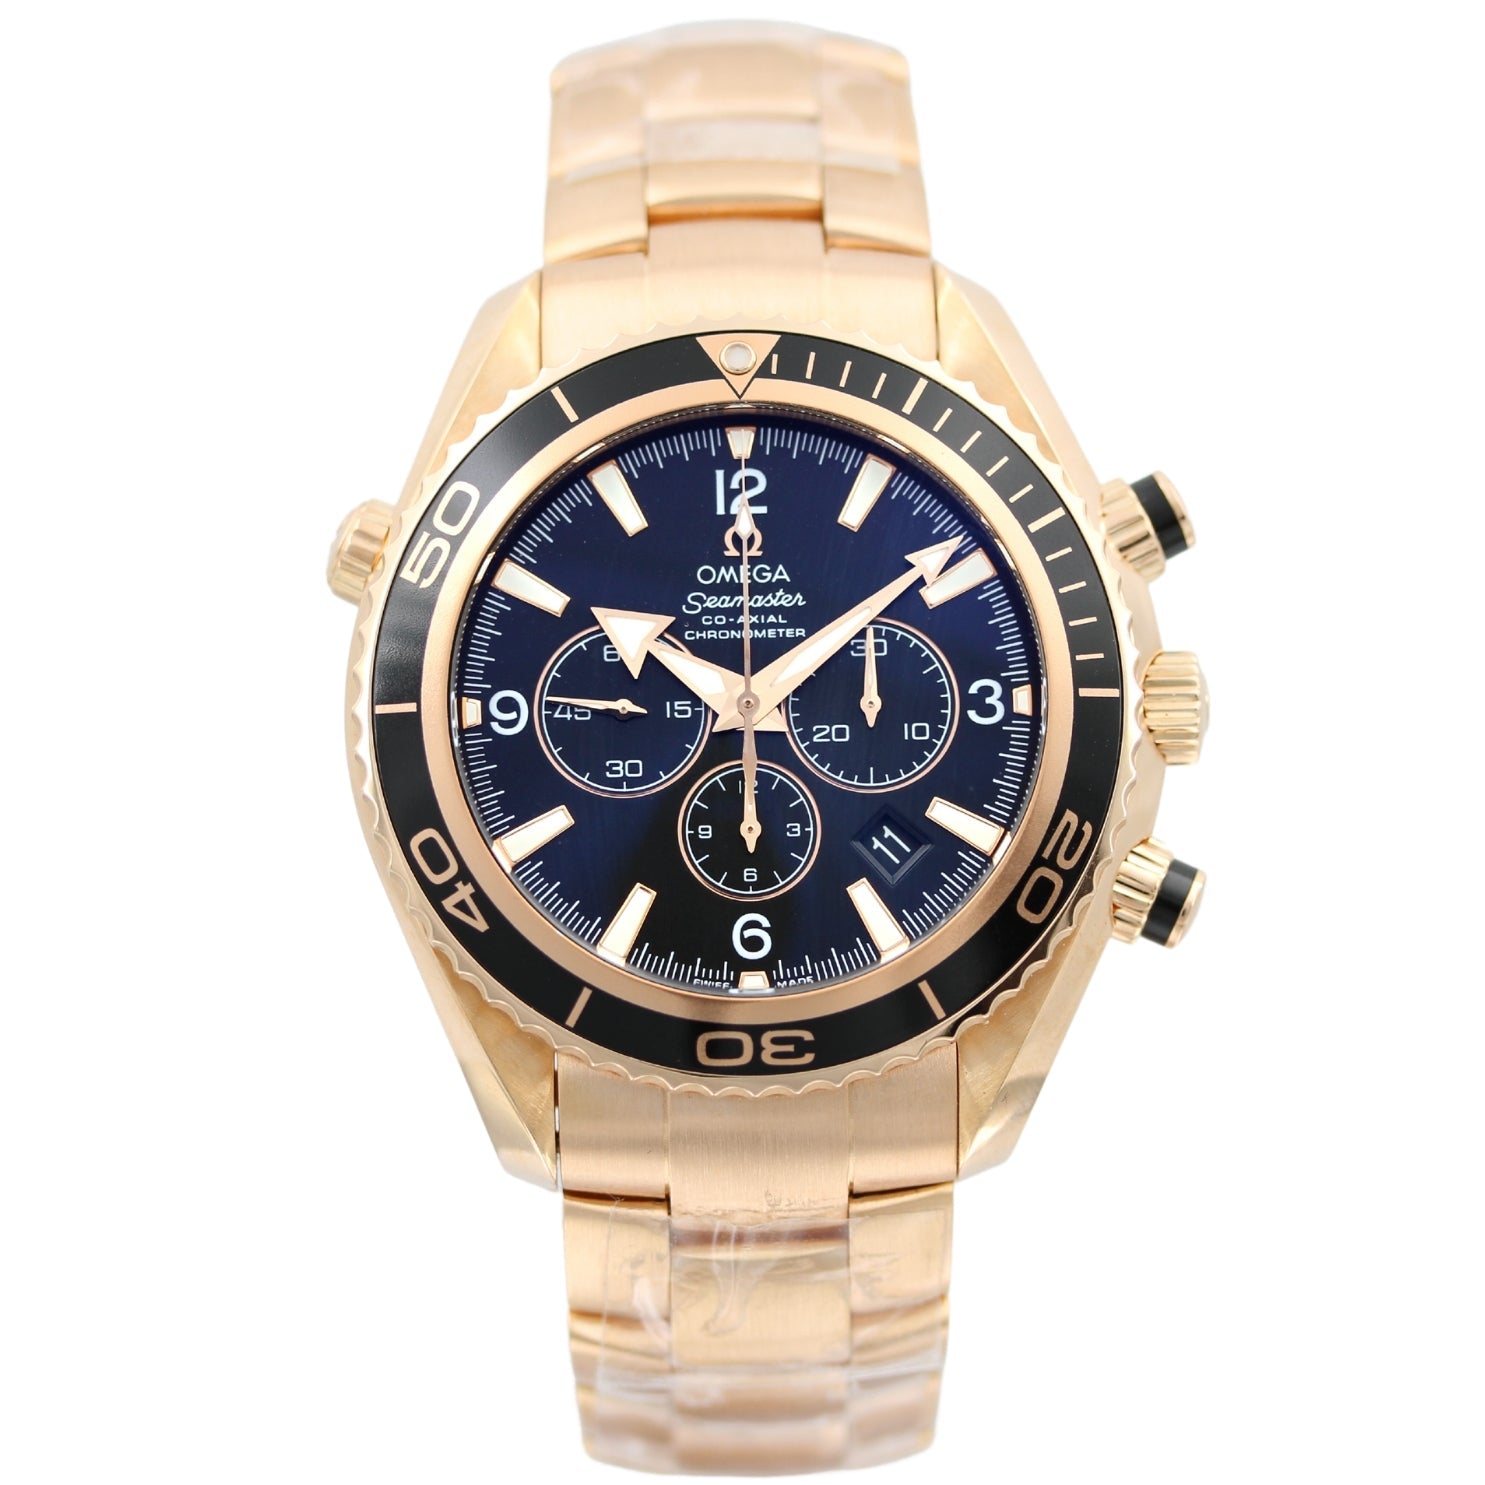 Omega Seamaster Planet Ocean 45.5mm, Rotgold, Ref. 222.60.46.50.01.001, B+P - LUXUHRIA